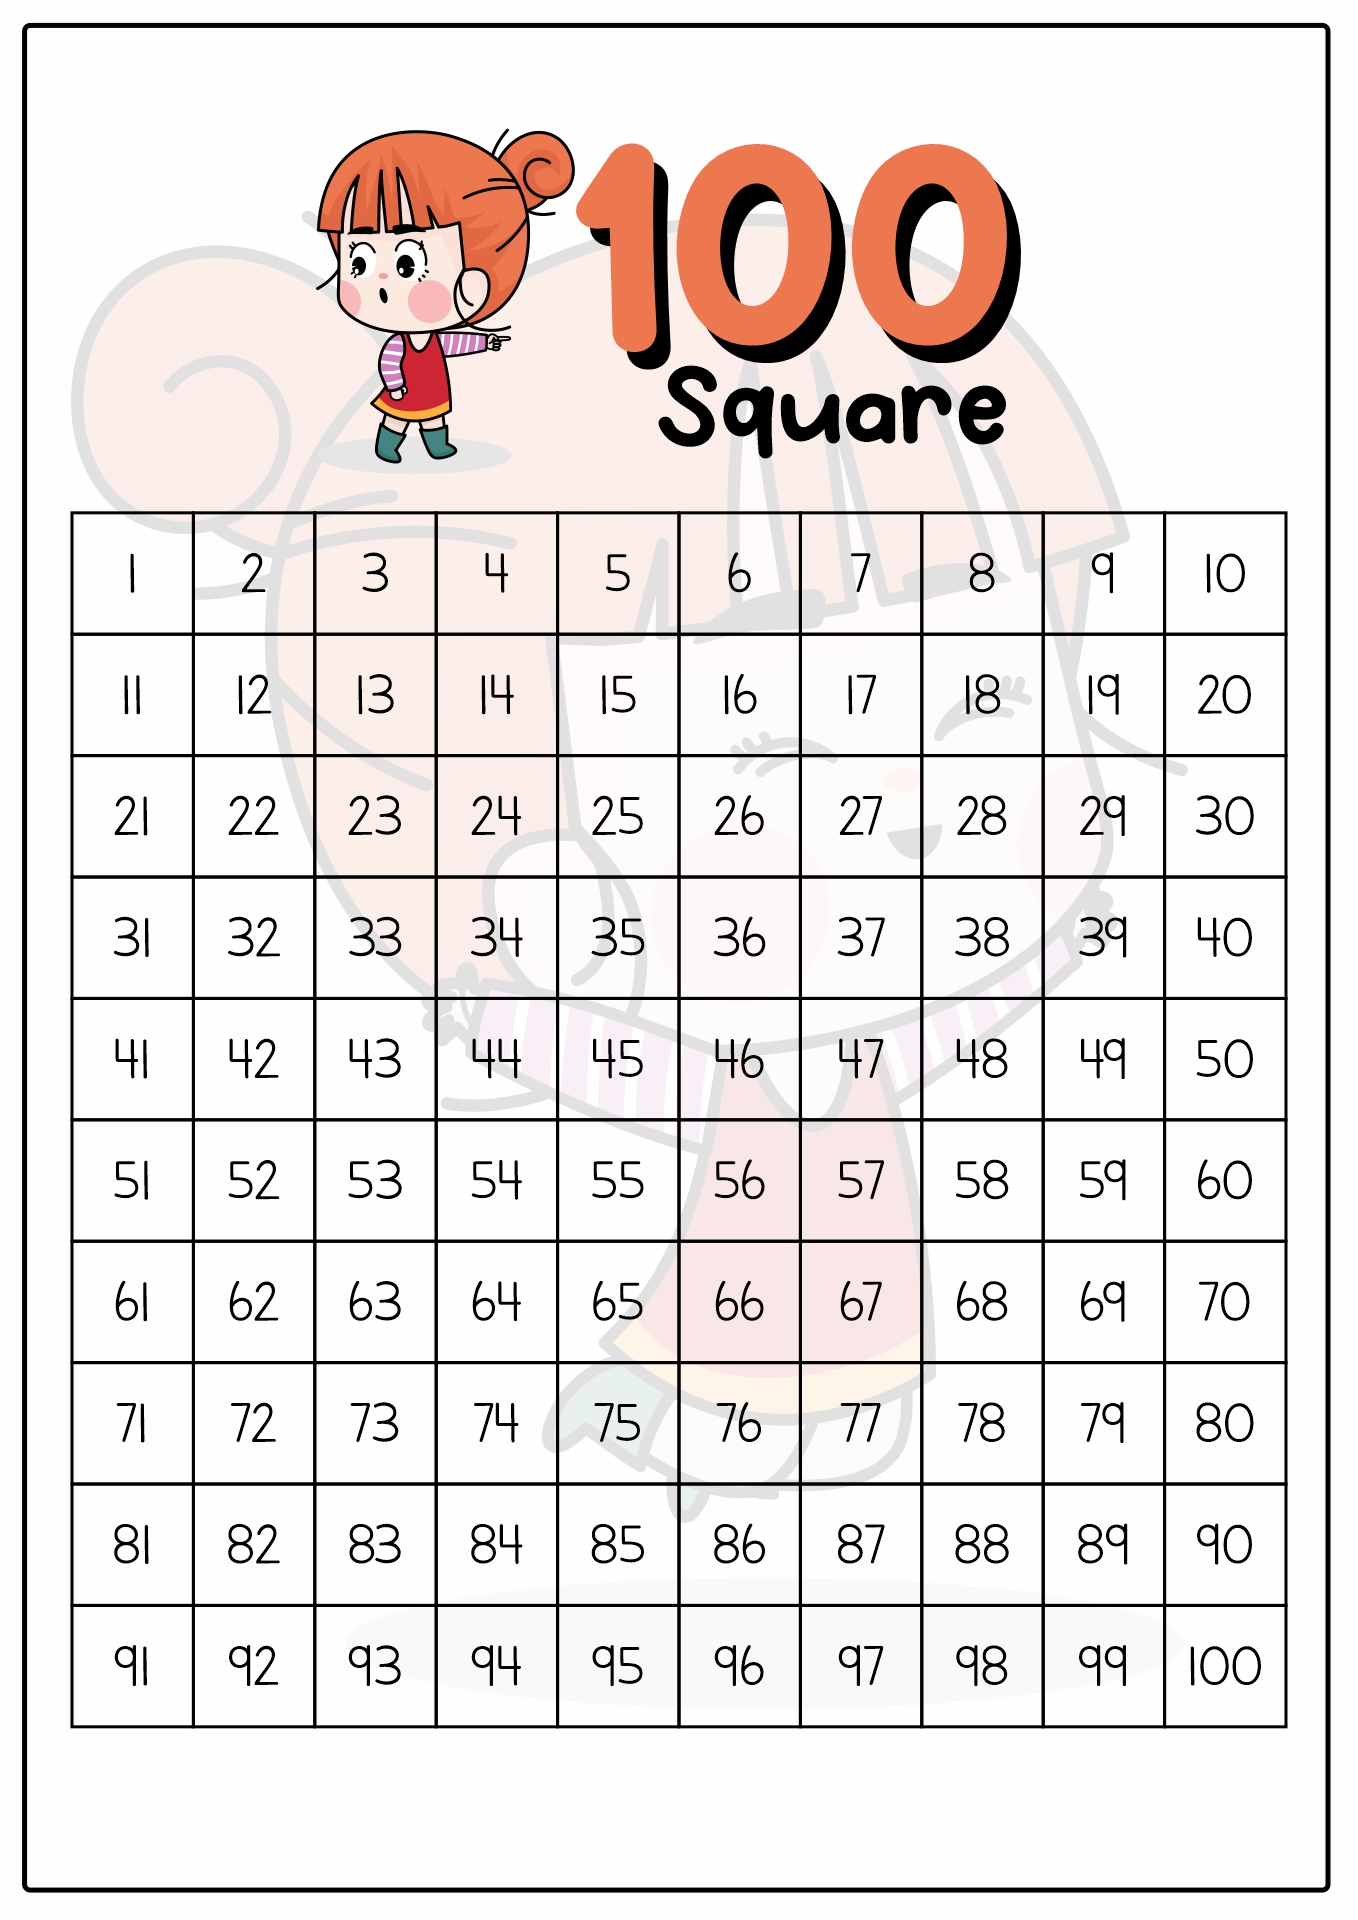 100 Number Square Image